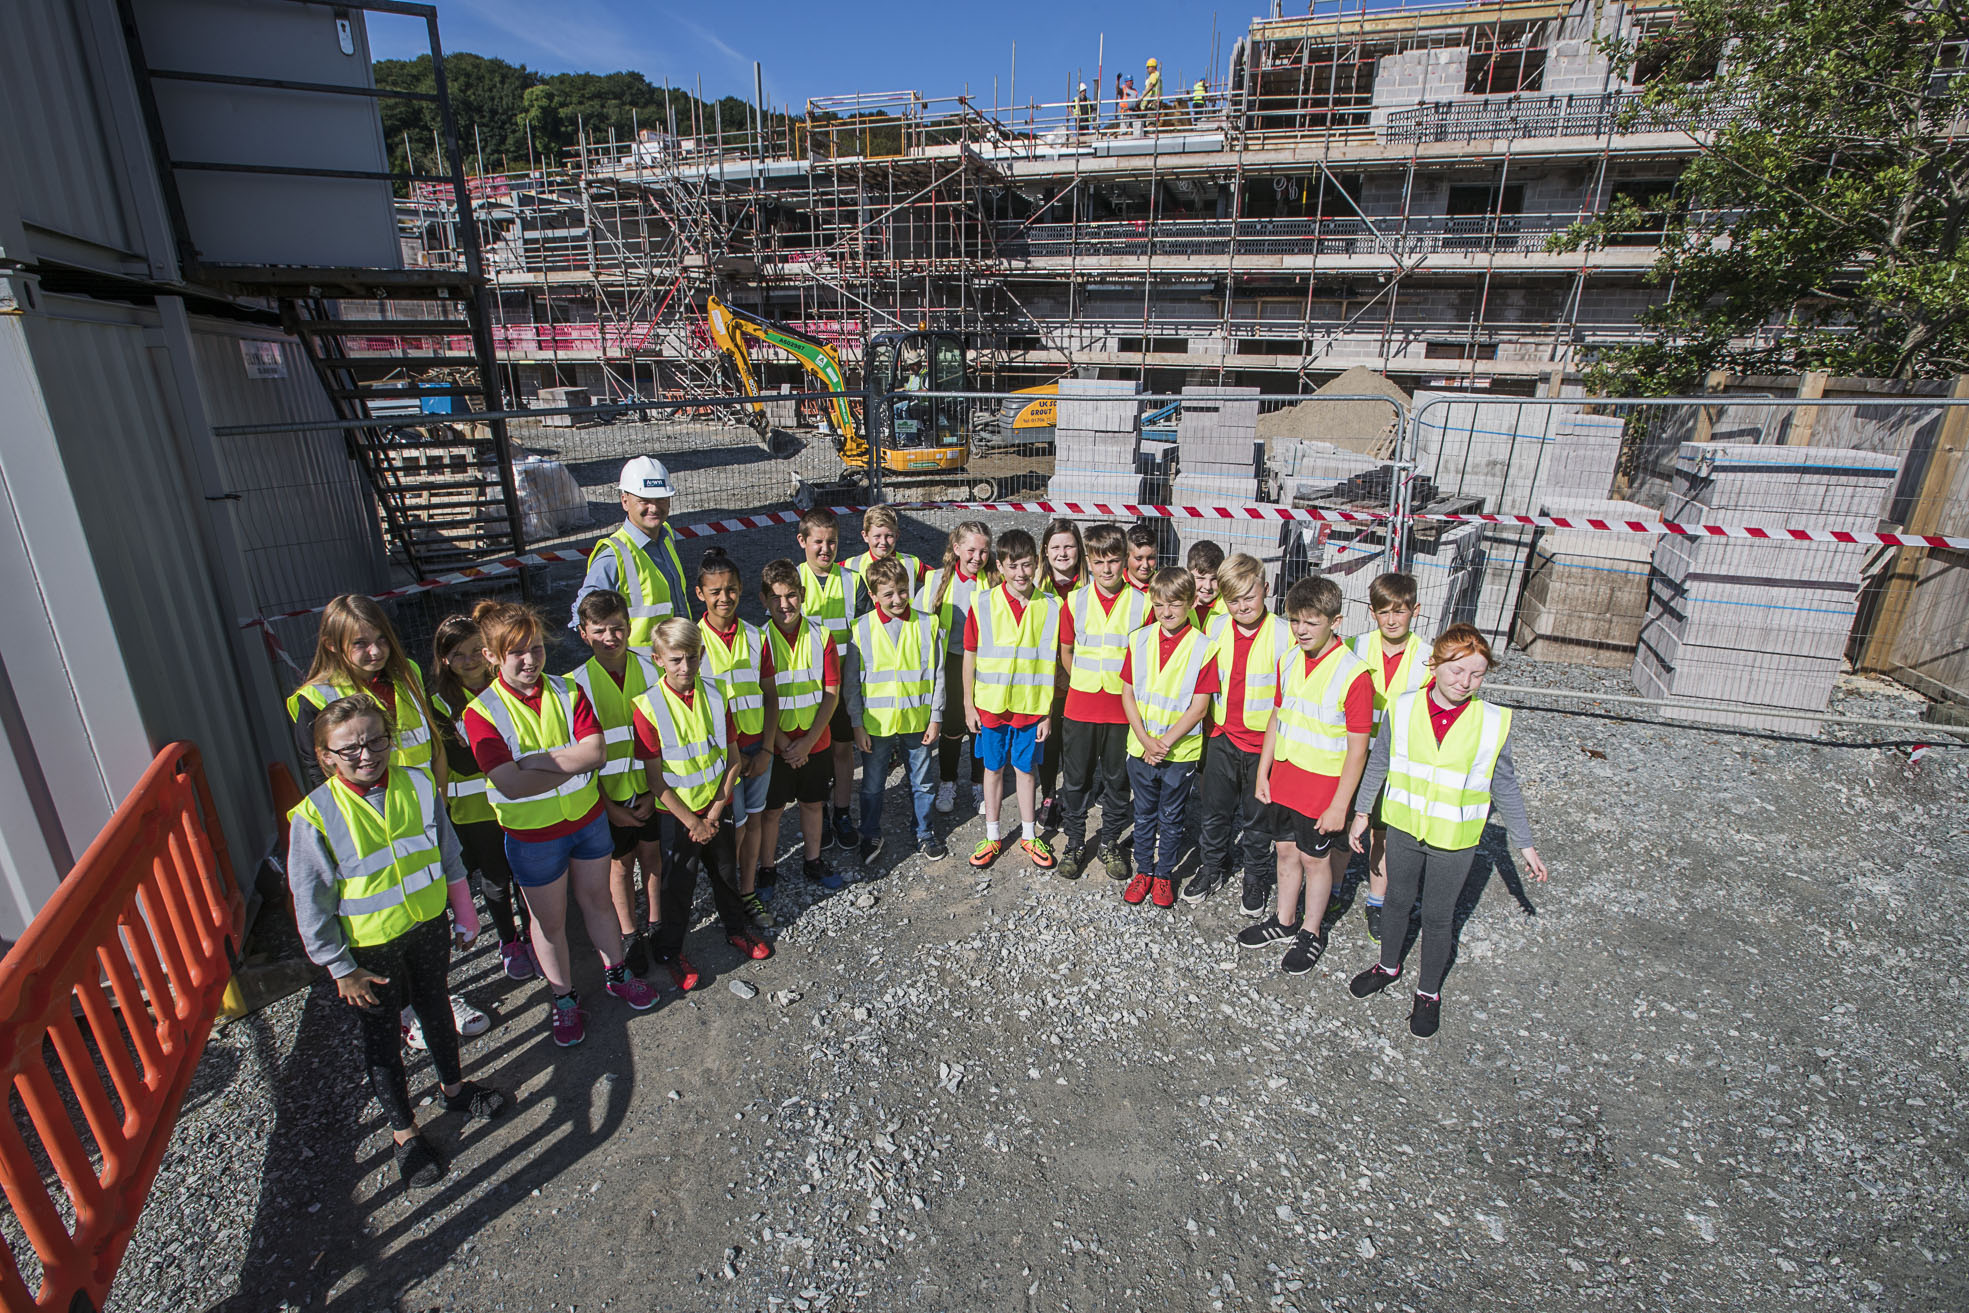 Primary school pupils get a sneak peek at new £7.5 million care home